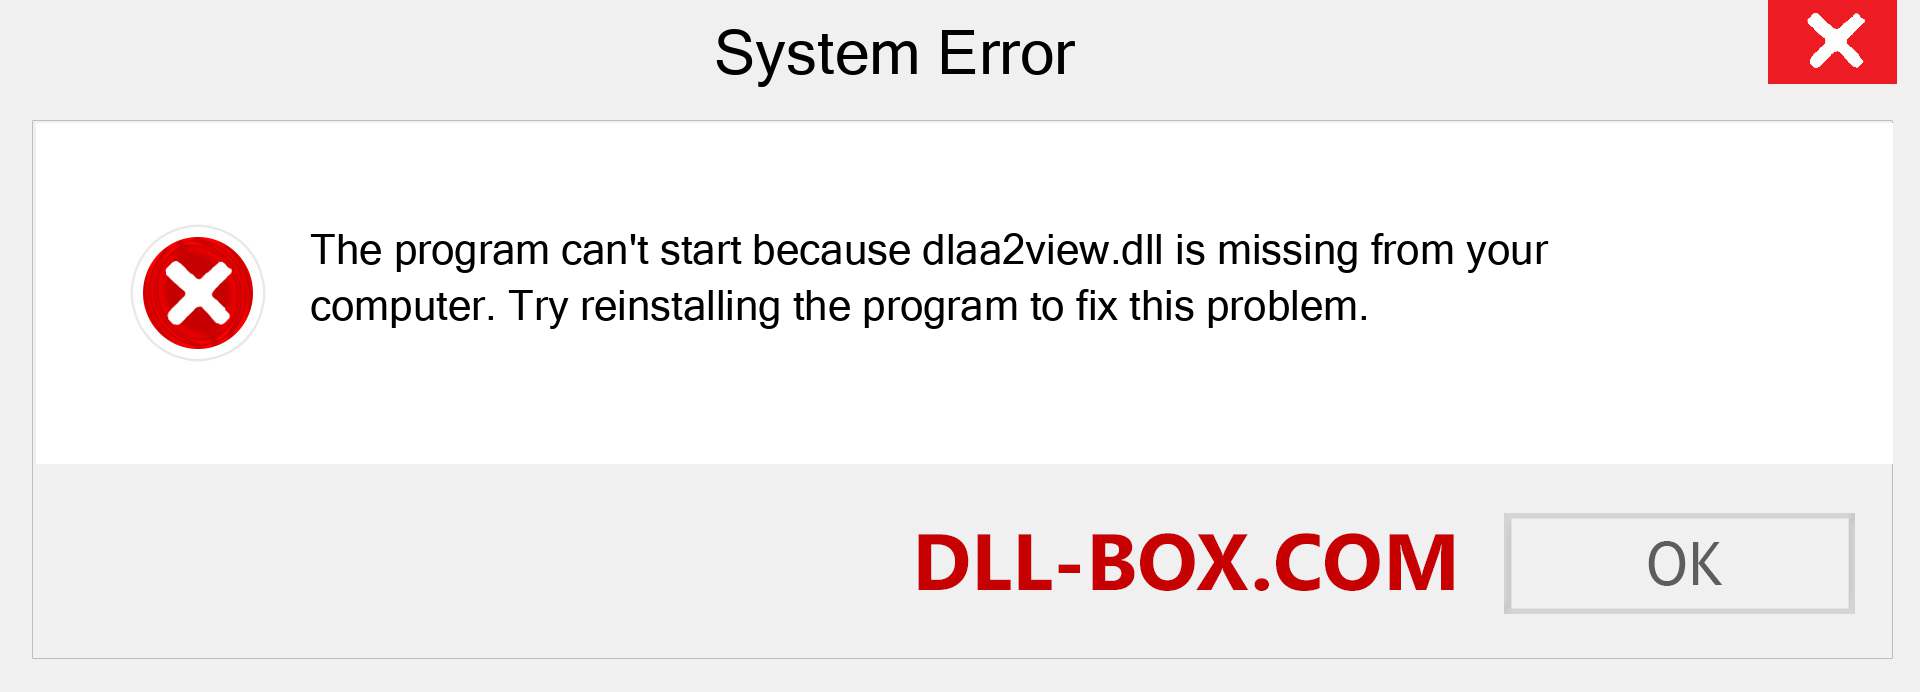  dlaa2view.dll file is missing?. Download for Windows 7, 8, 10 - Fix  dlaa2view dll Missing Error on Windows, photos, images